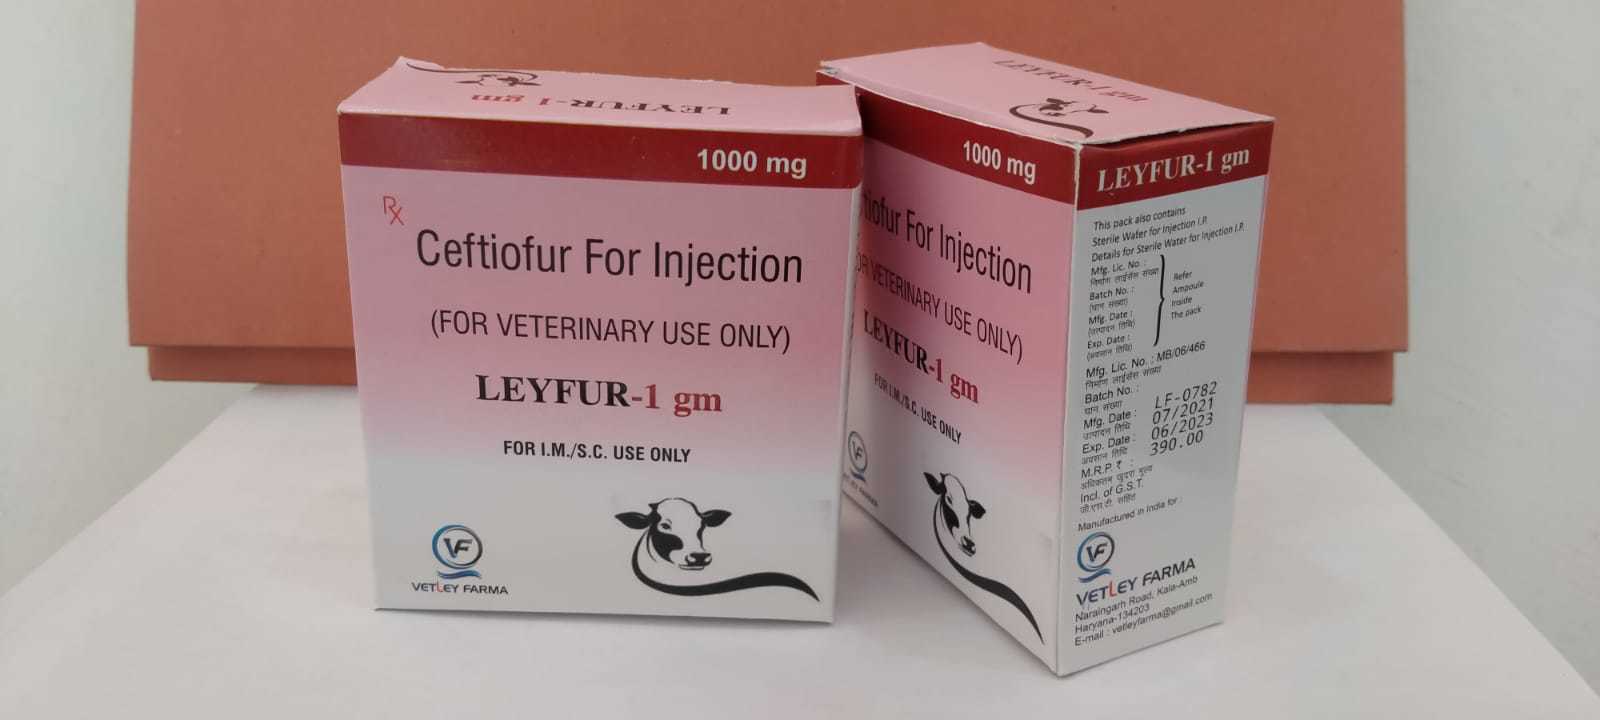 Ceftiofur Injection 1.0 G For Veterinary Use